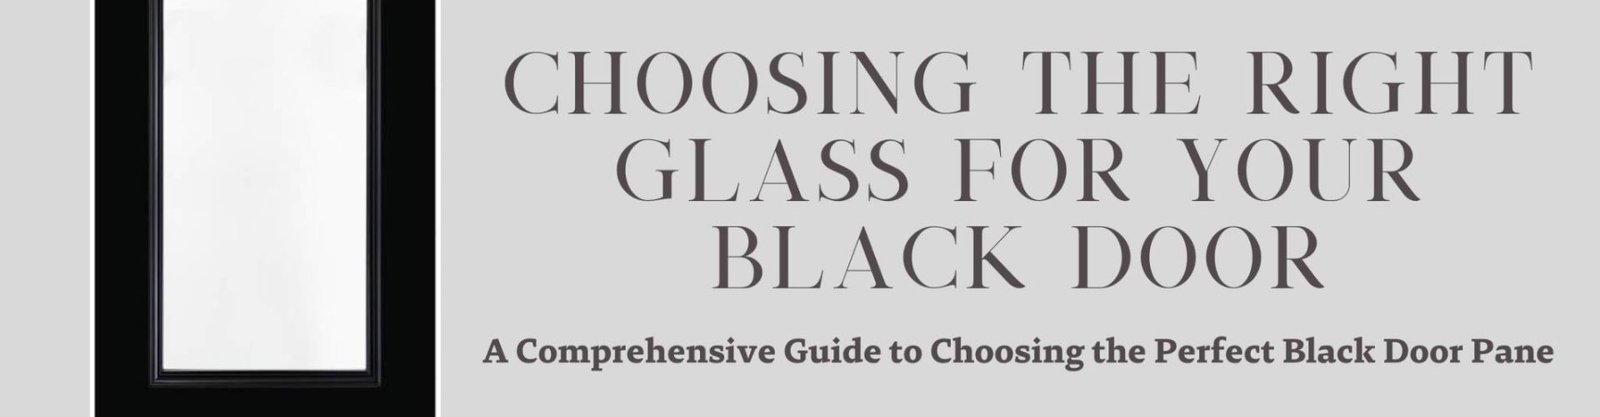 A Comprehensive Guide to Choosing the Perfect Black Door Pane